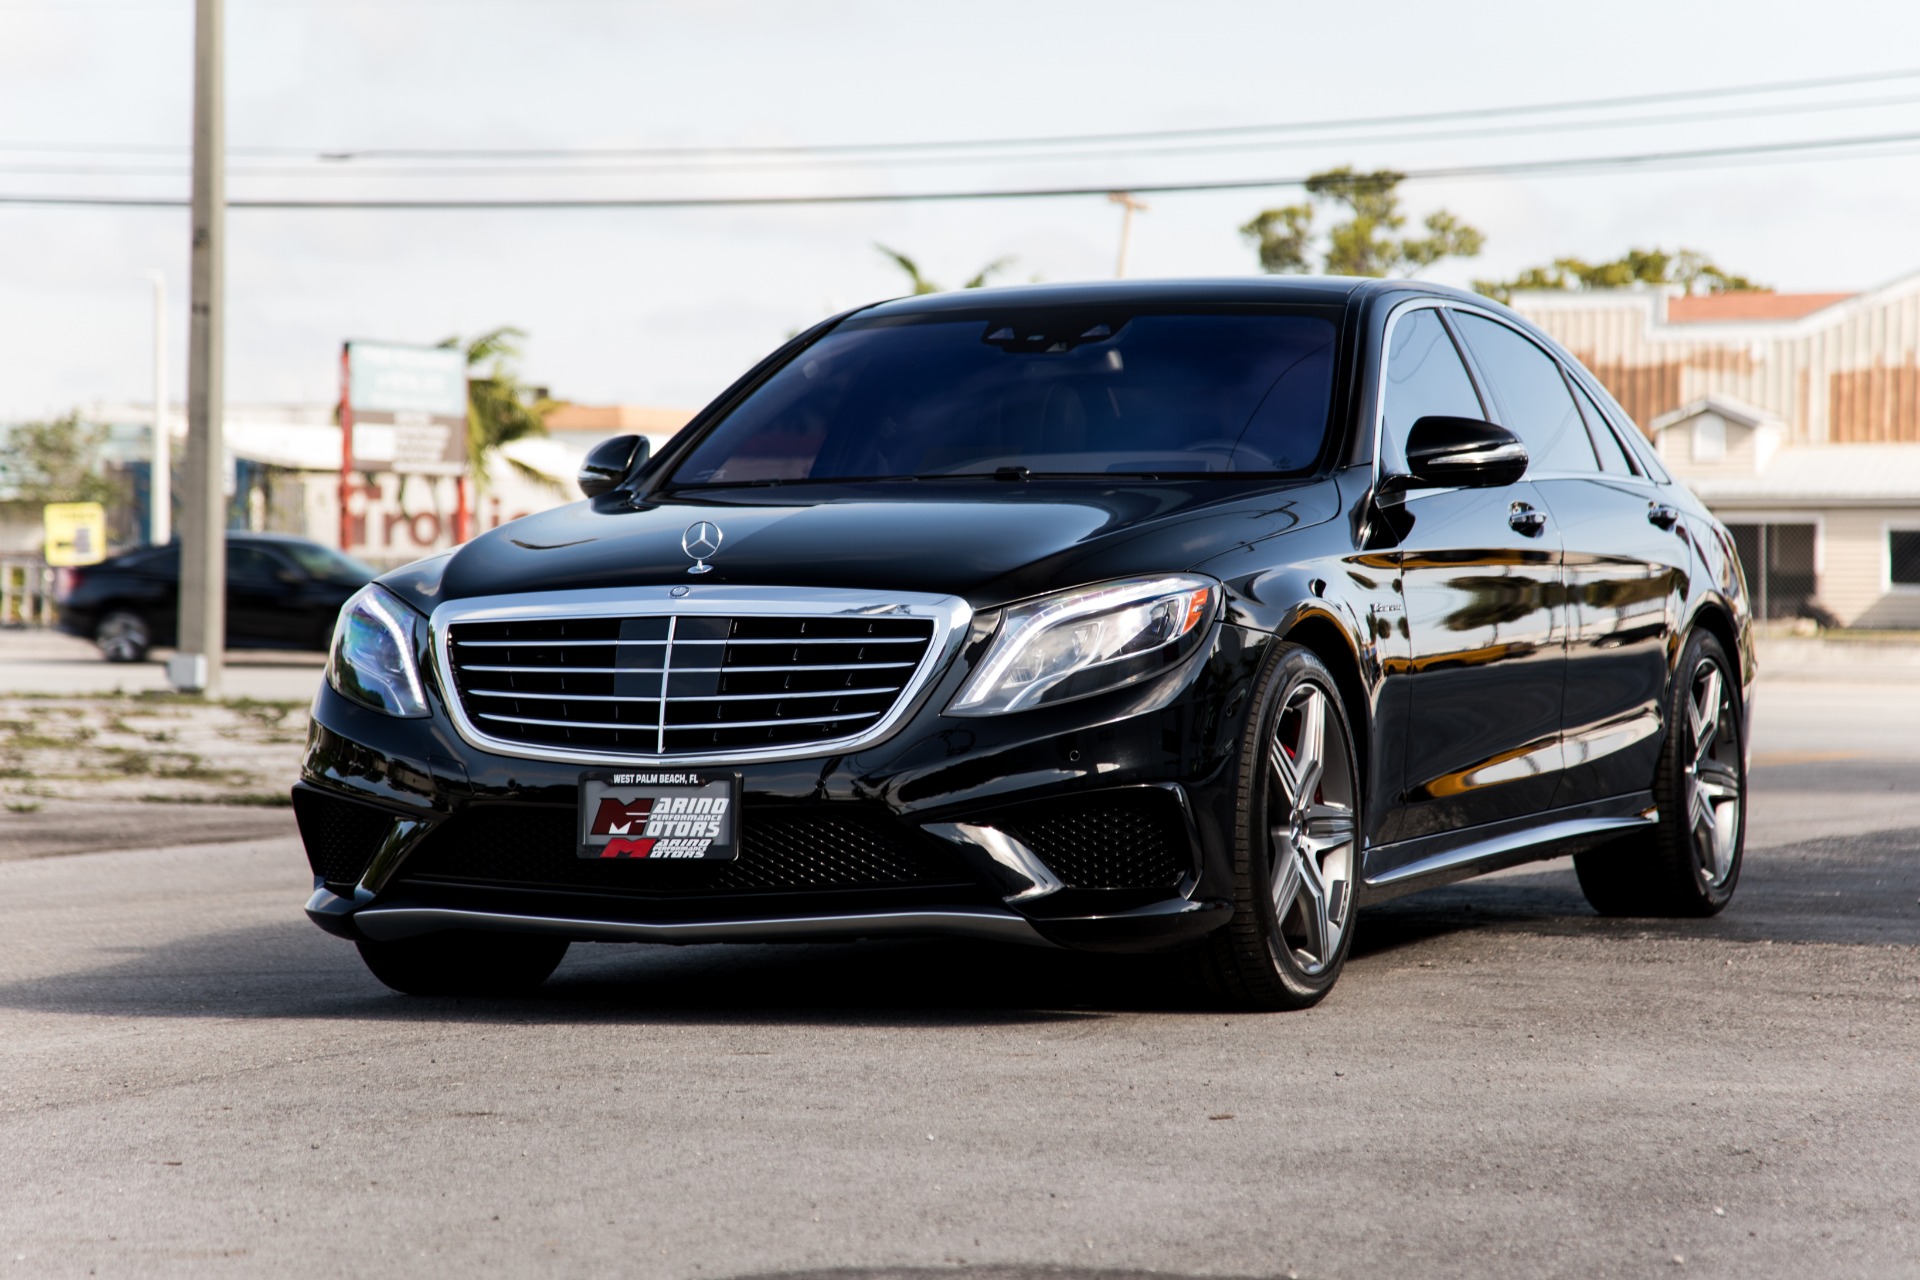 Used 2015 Mercedes Benz S Class S 63 Amg For Sale 82 900 Marino